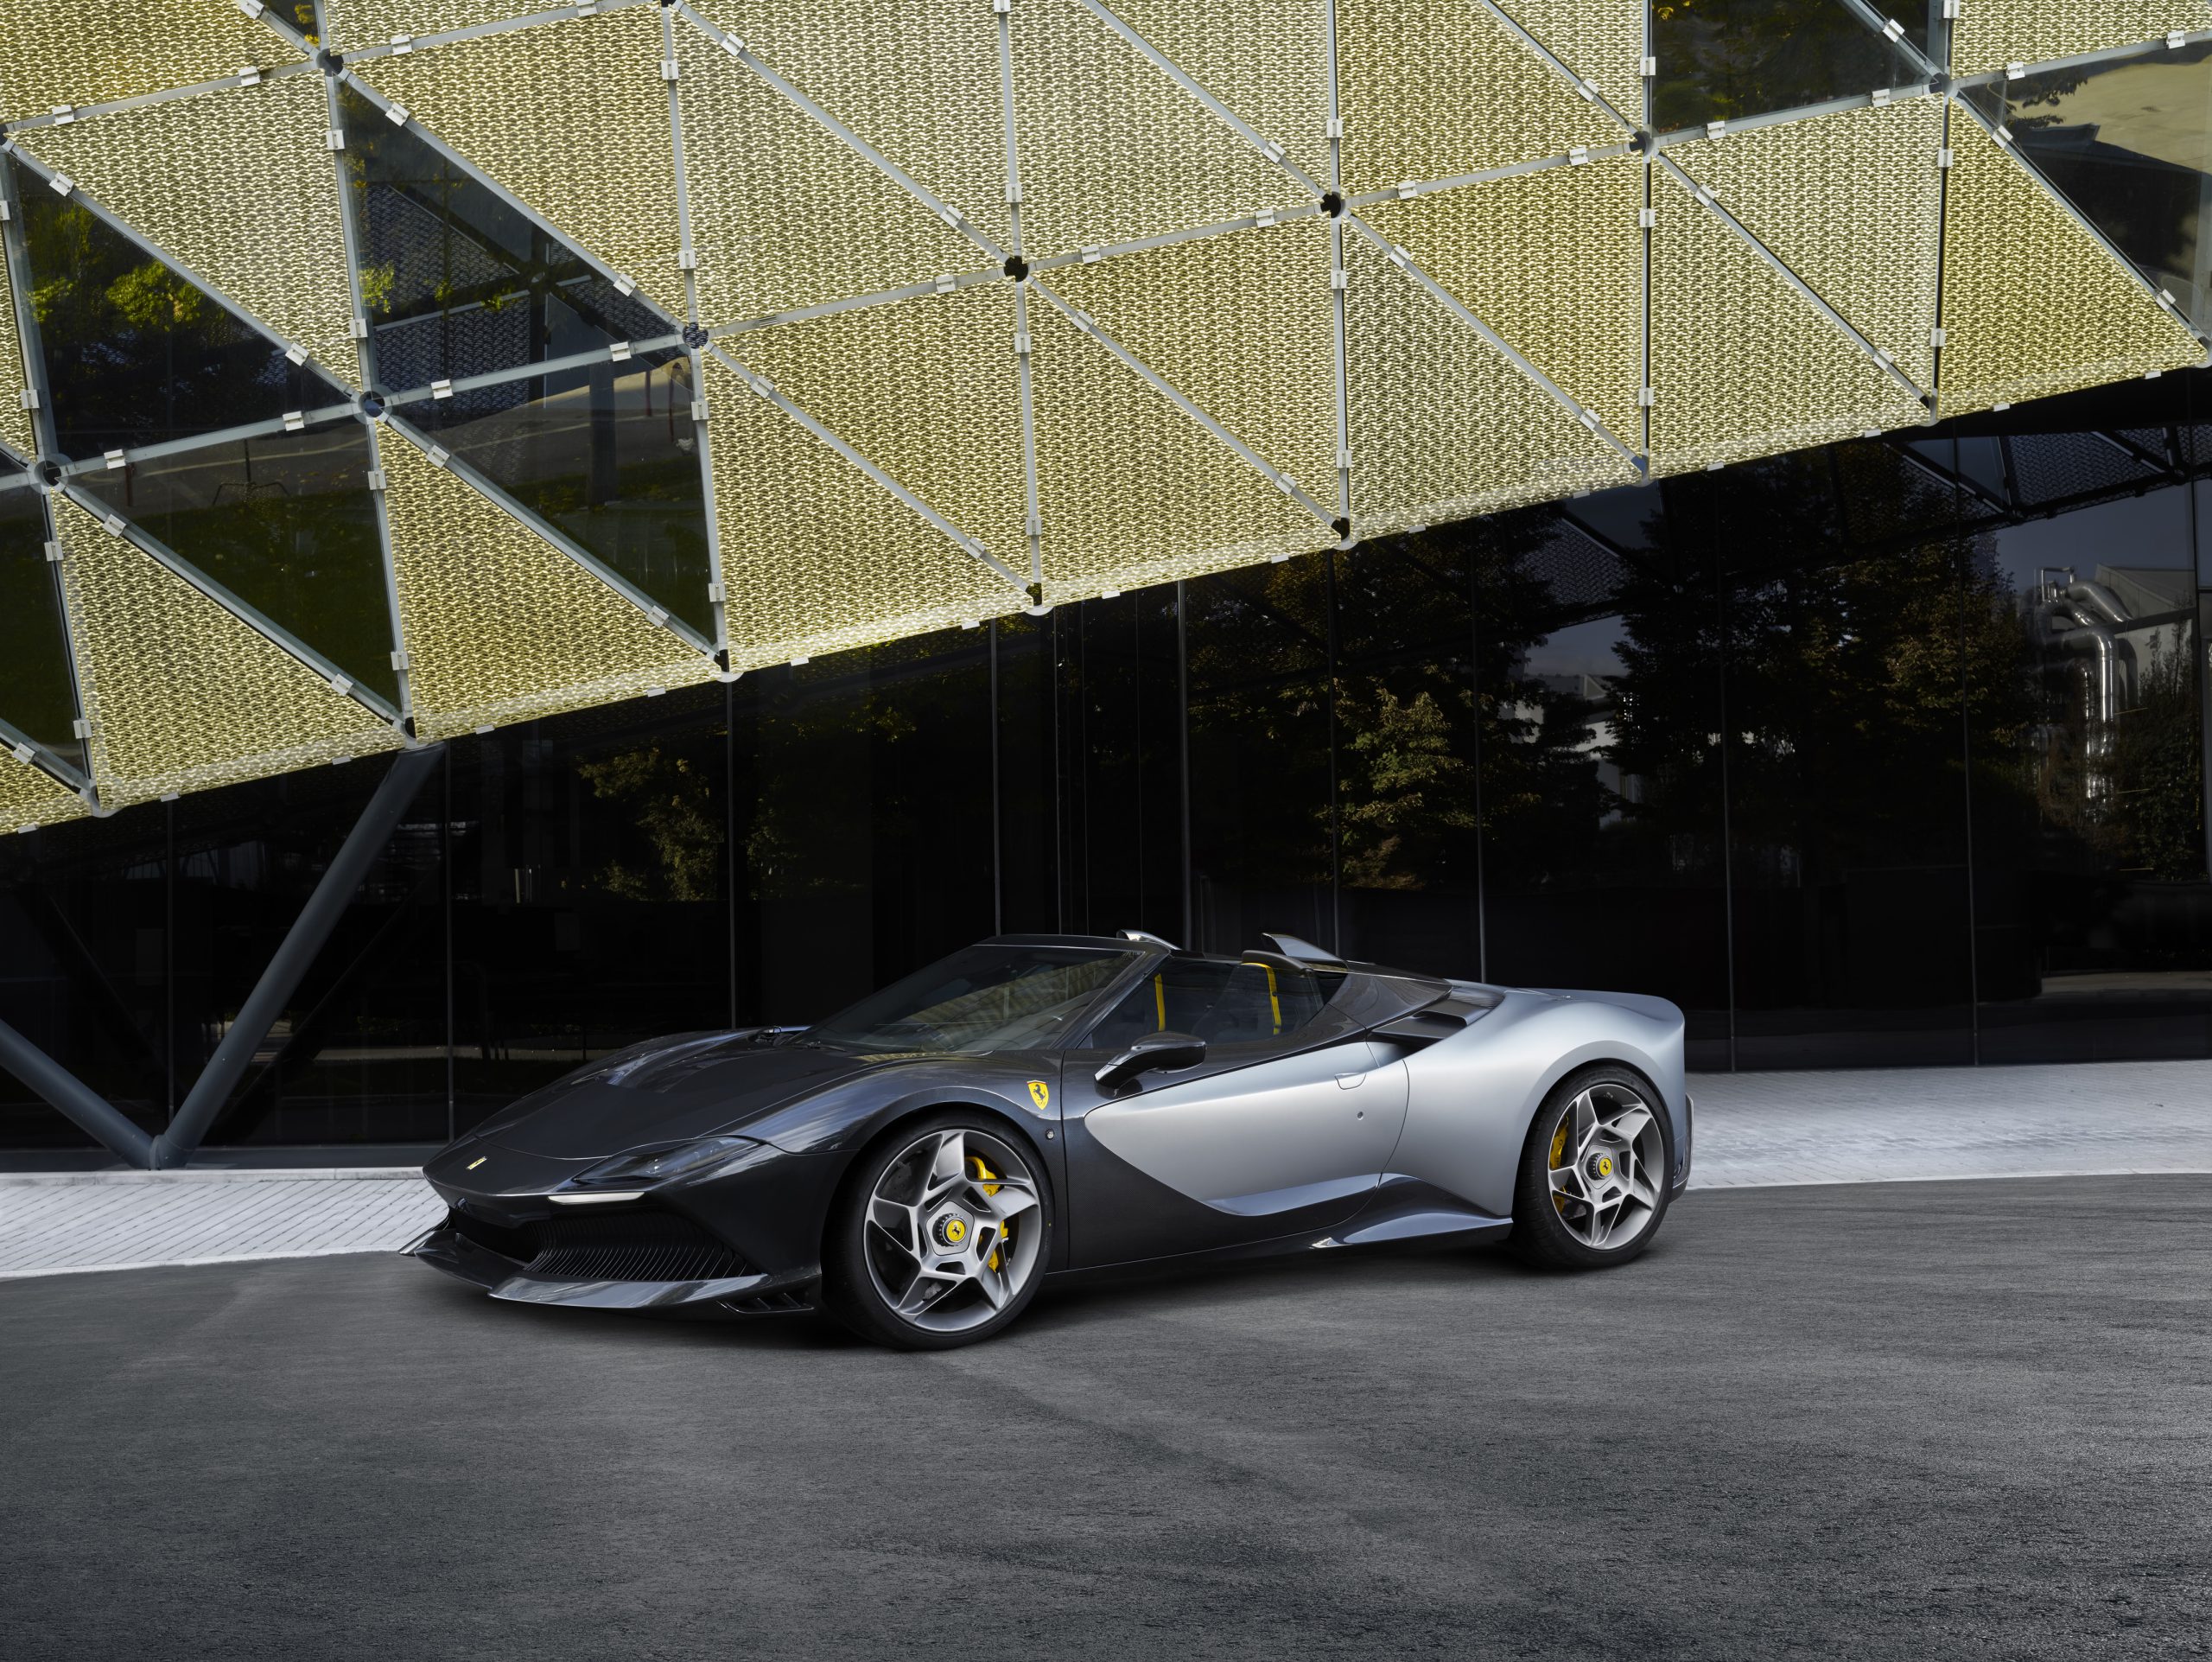 Ferrari’s latest one-off is a Spider-slash-show pony